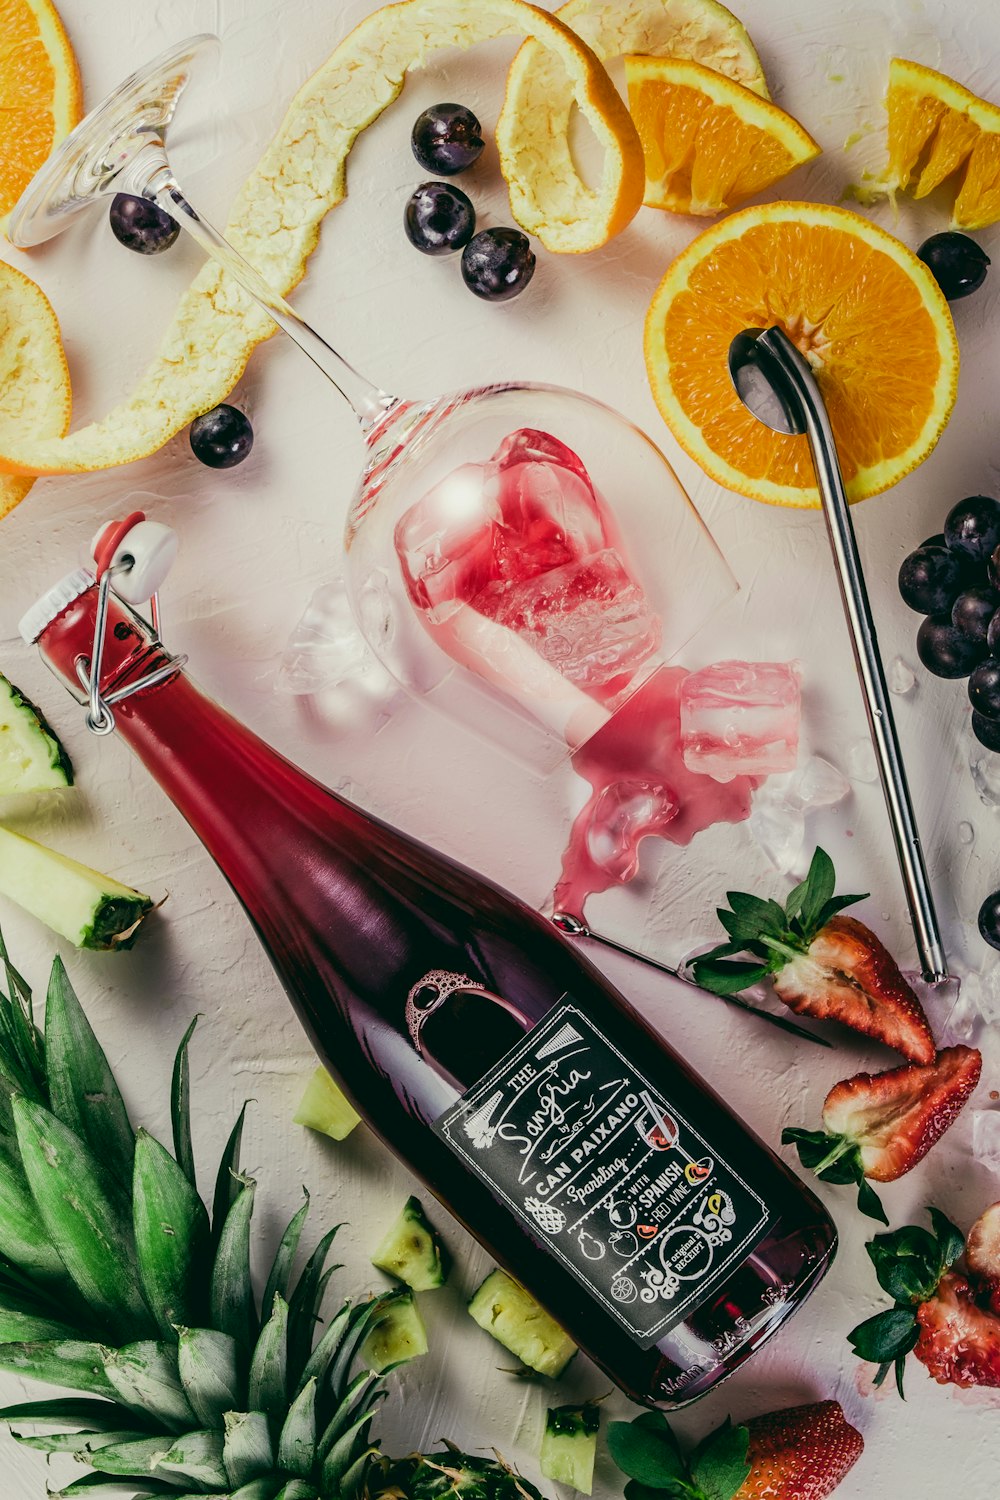 flat-lay photograph of sliced fruits, swing top bottle, and wine glass